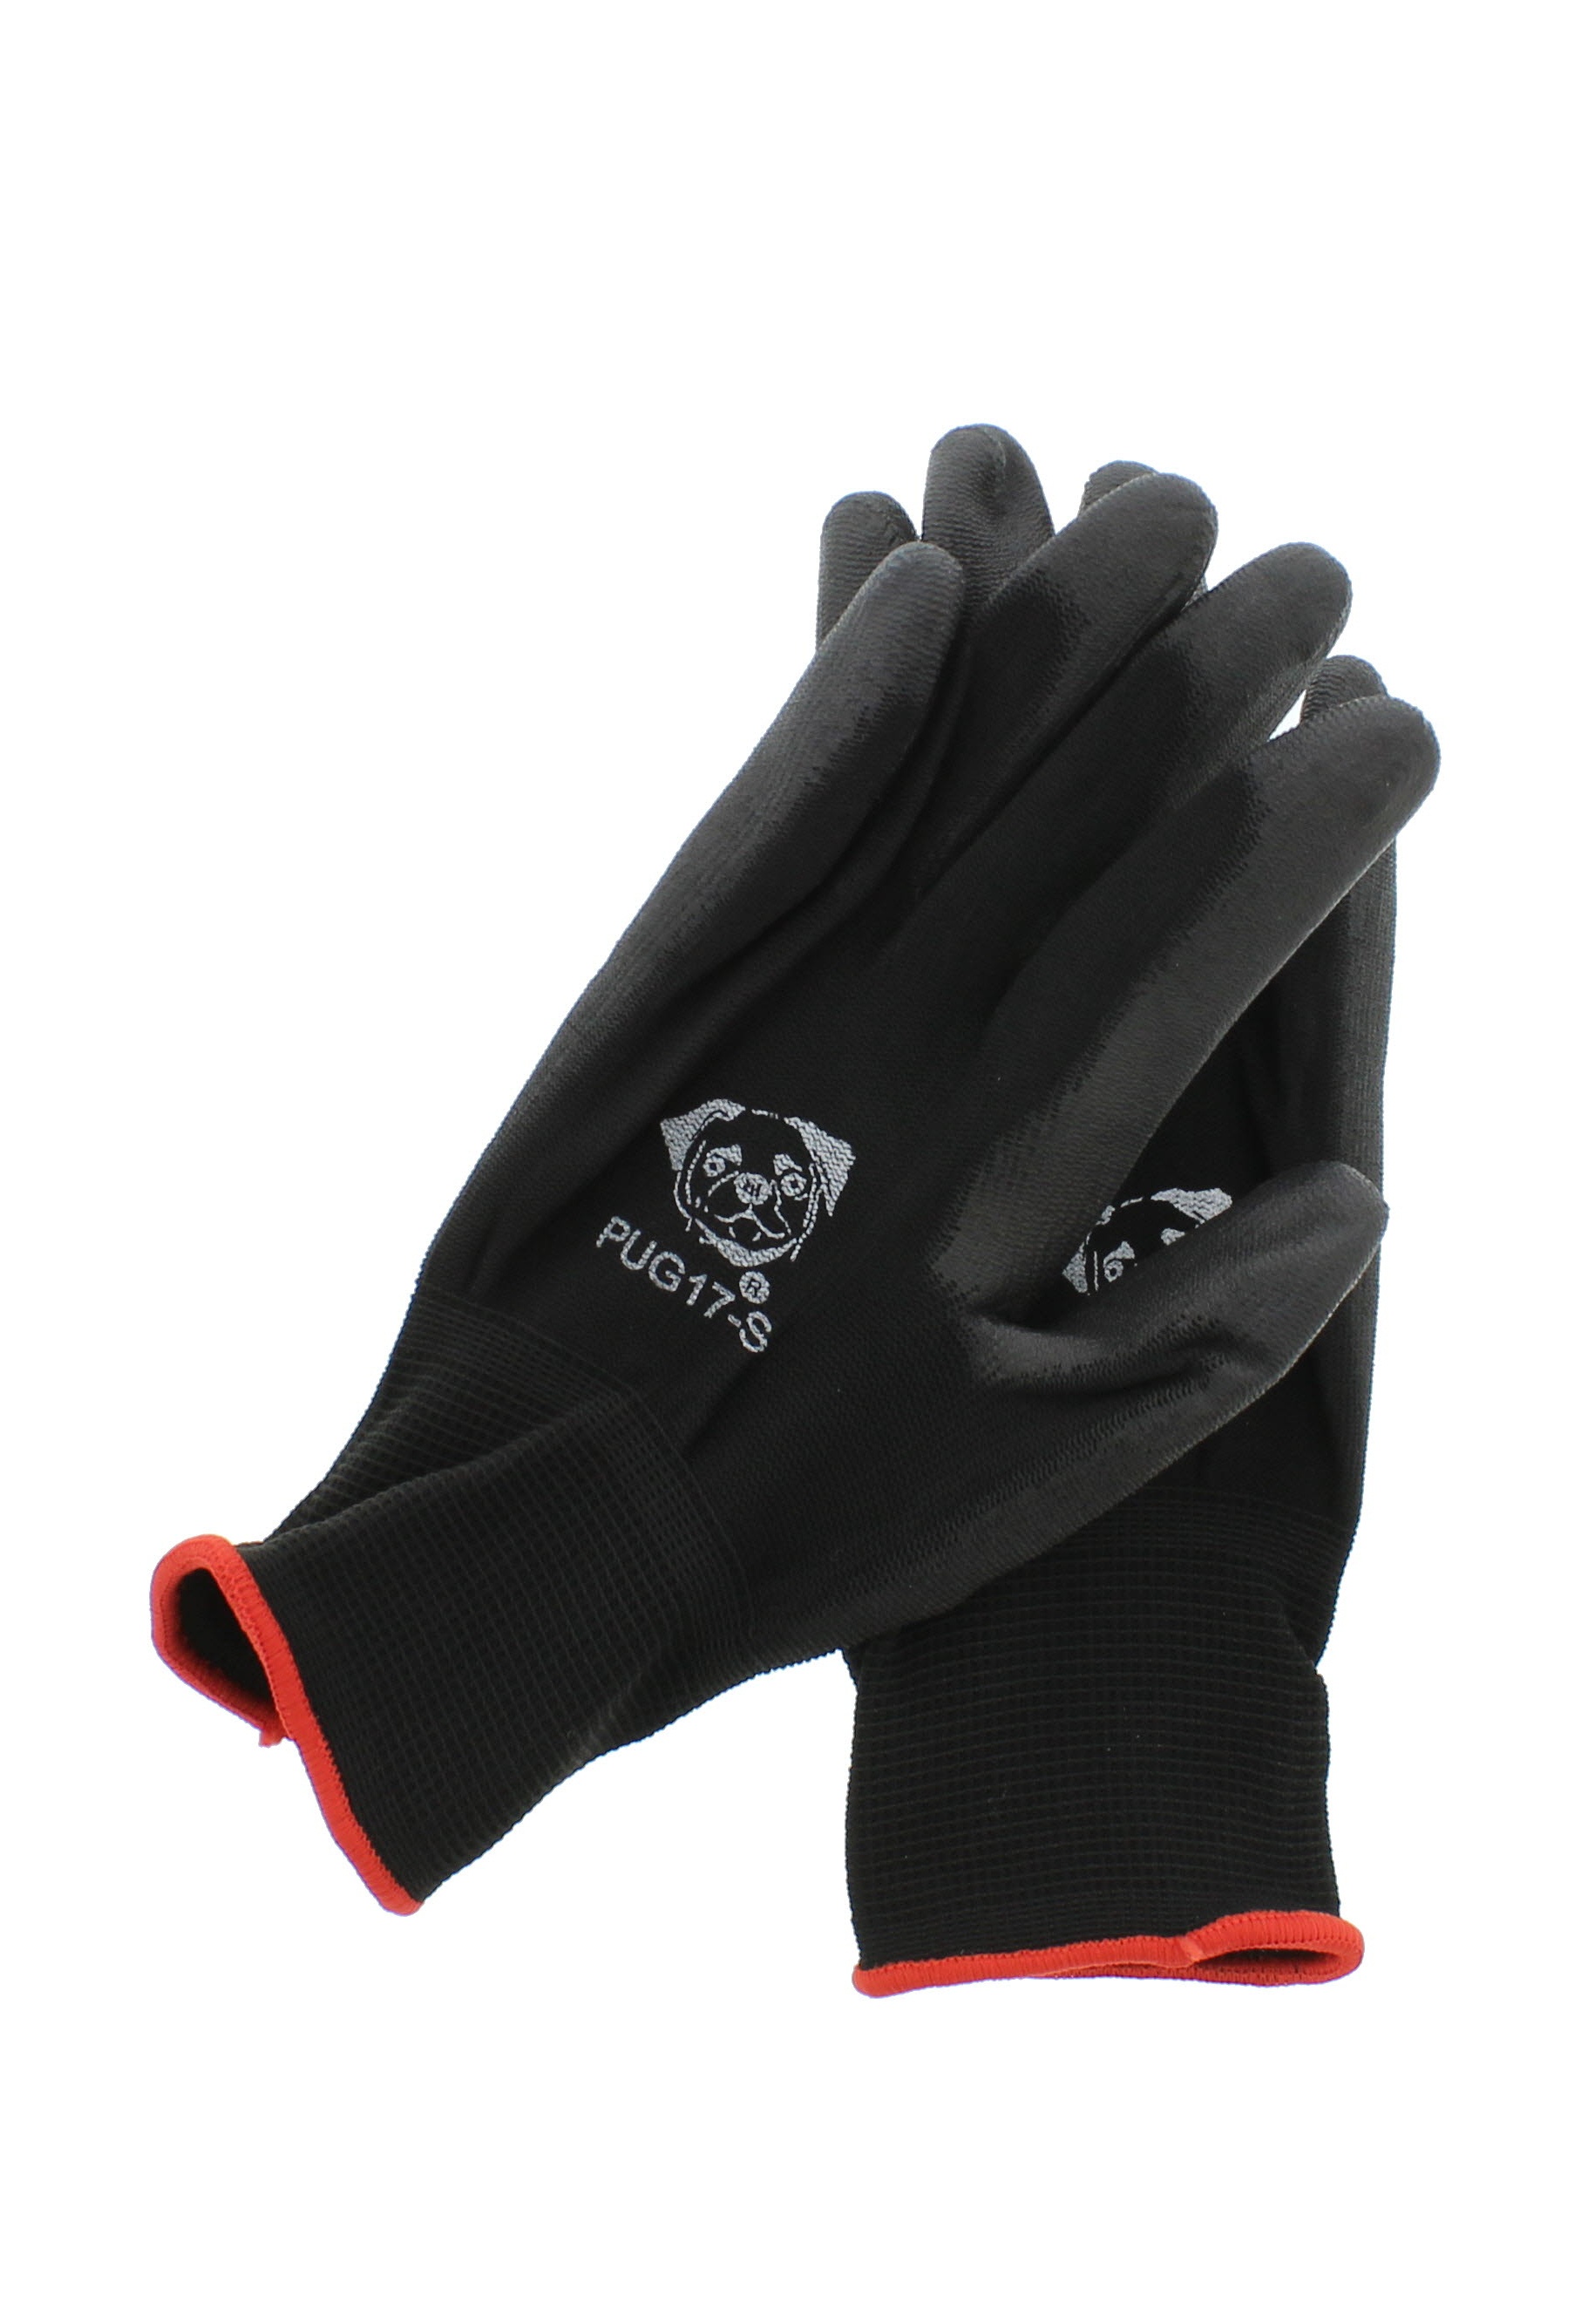 NYLON PURE BLACK PU COATED SAFETY WORKING GLOVES ~CHOOSE QTY & SIZE~ **NEW**